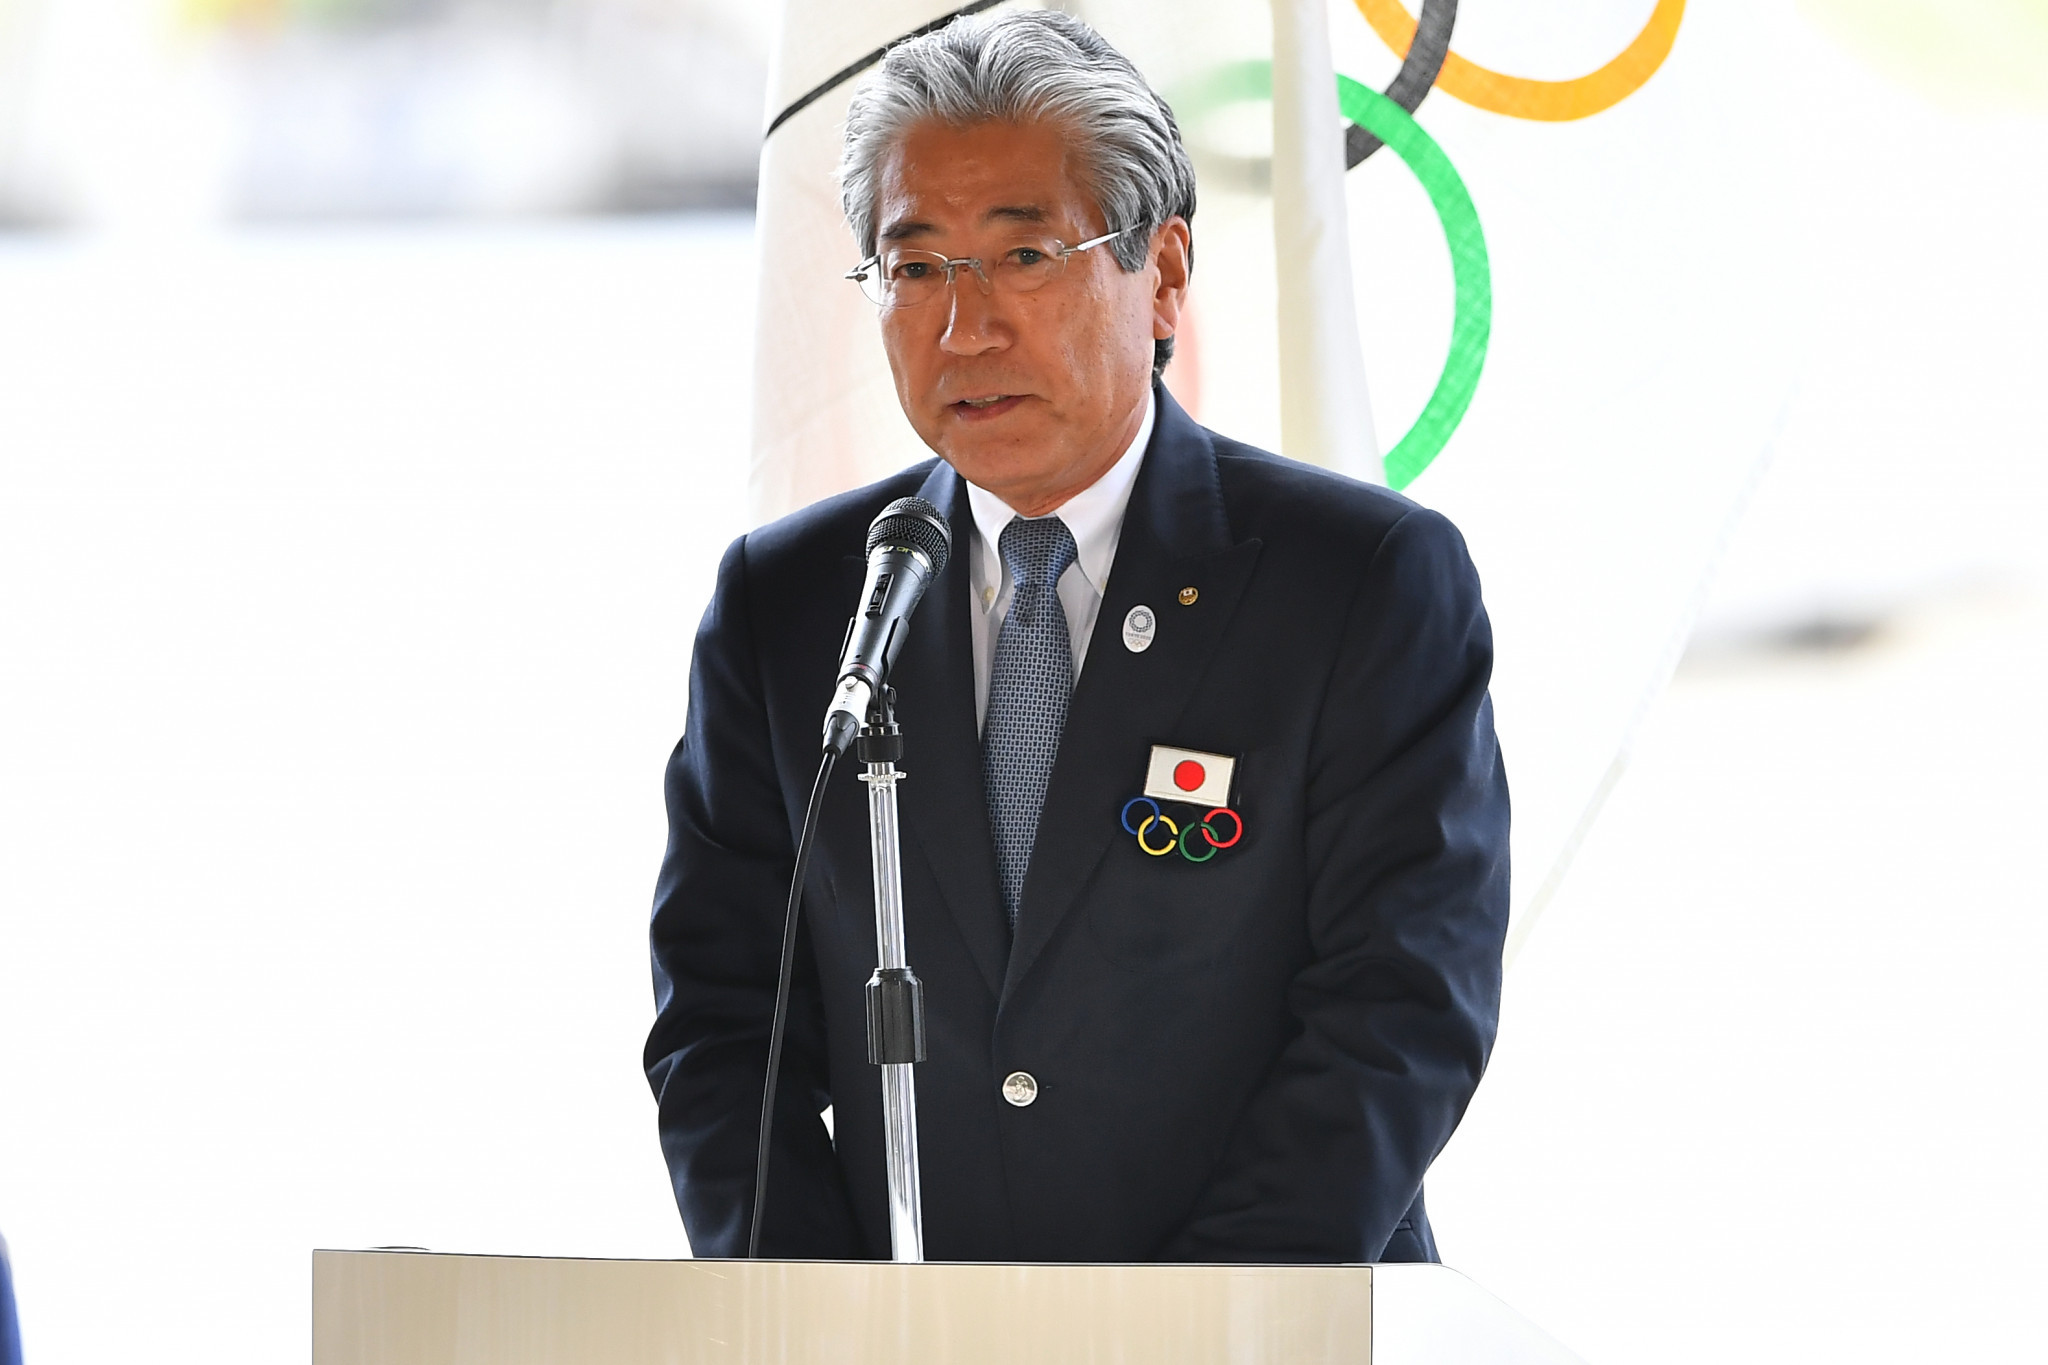 Japanese Olympic Committee President Tsunekazu Takeda has become the latest to express support for Pyeongchang 2018 ©Getty Images